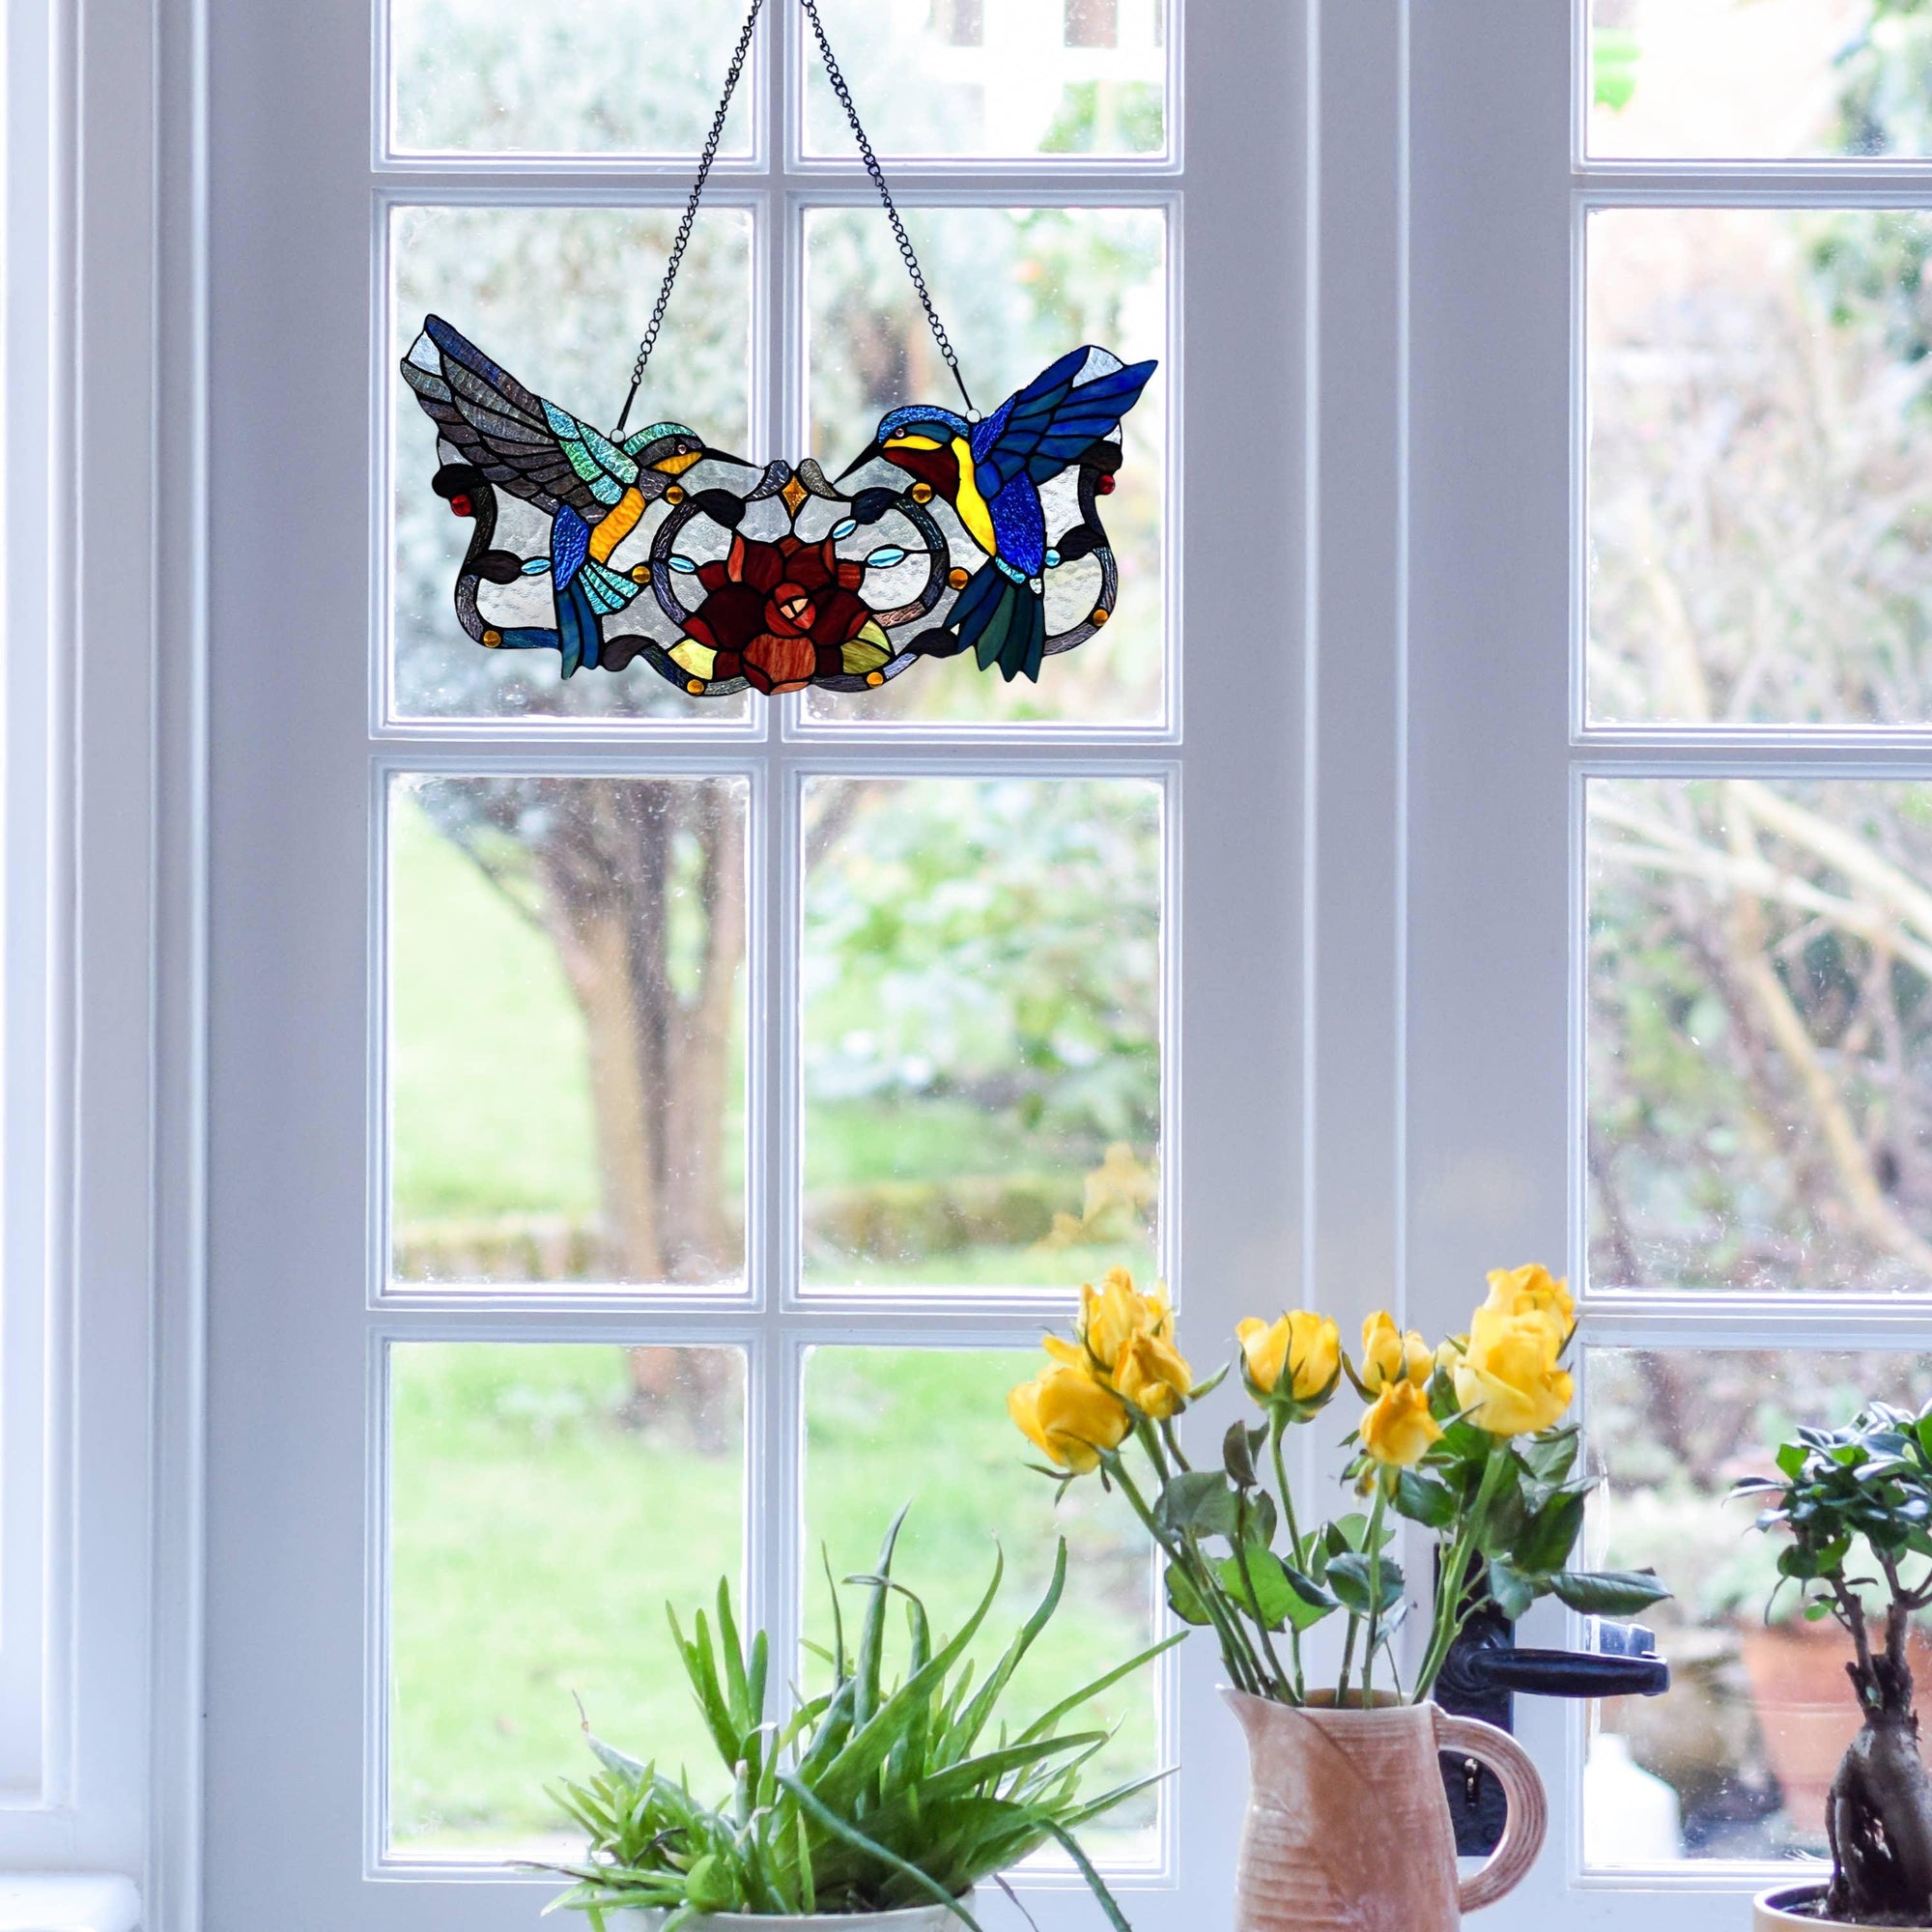 Hummingbird Stained Glass Hanging - A beautiful stained glass artwork featuring graceful hummingbirds in flight